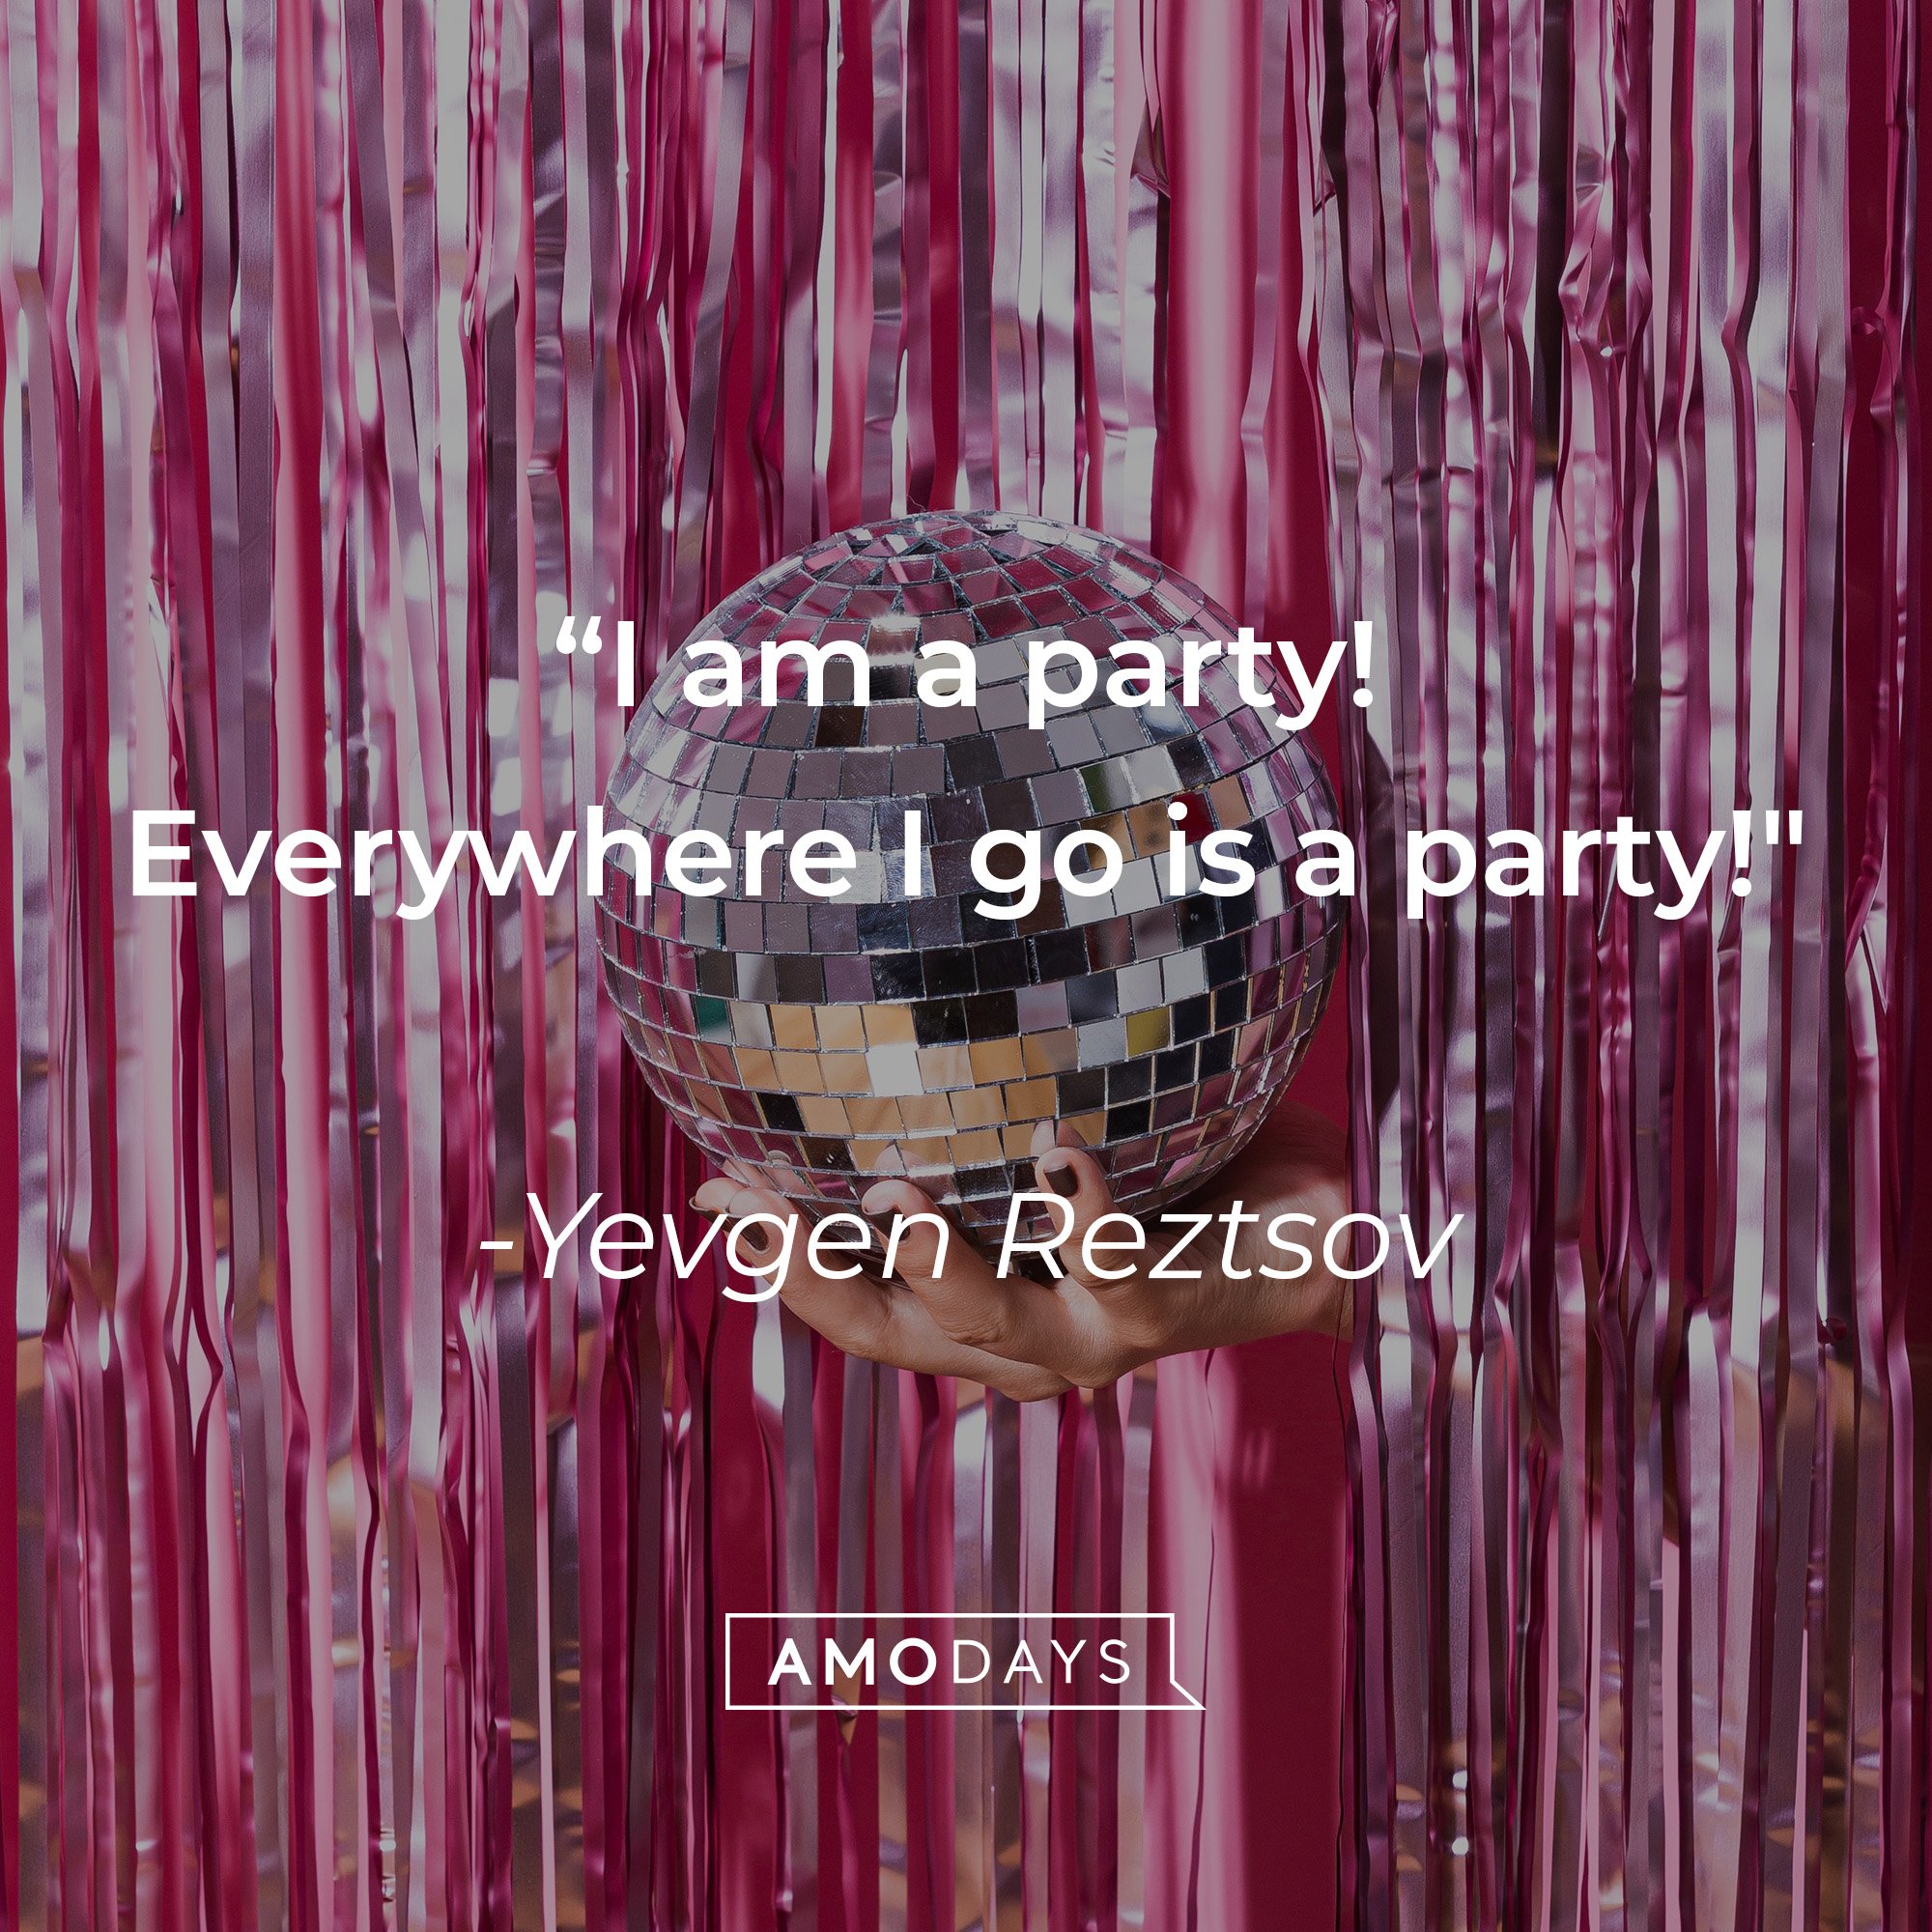 Yevgen Rezstov's quote: "I am a party. Everywhere I go is a party!" | Image: AmoDays 